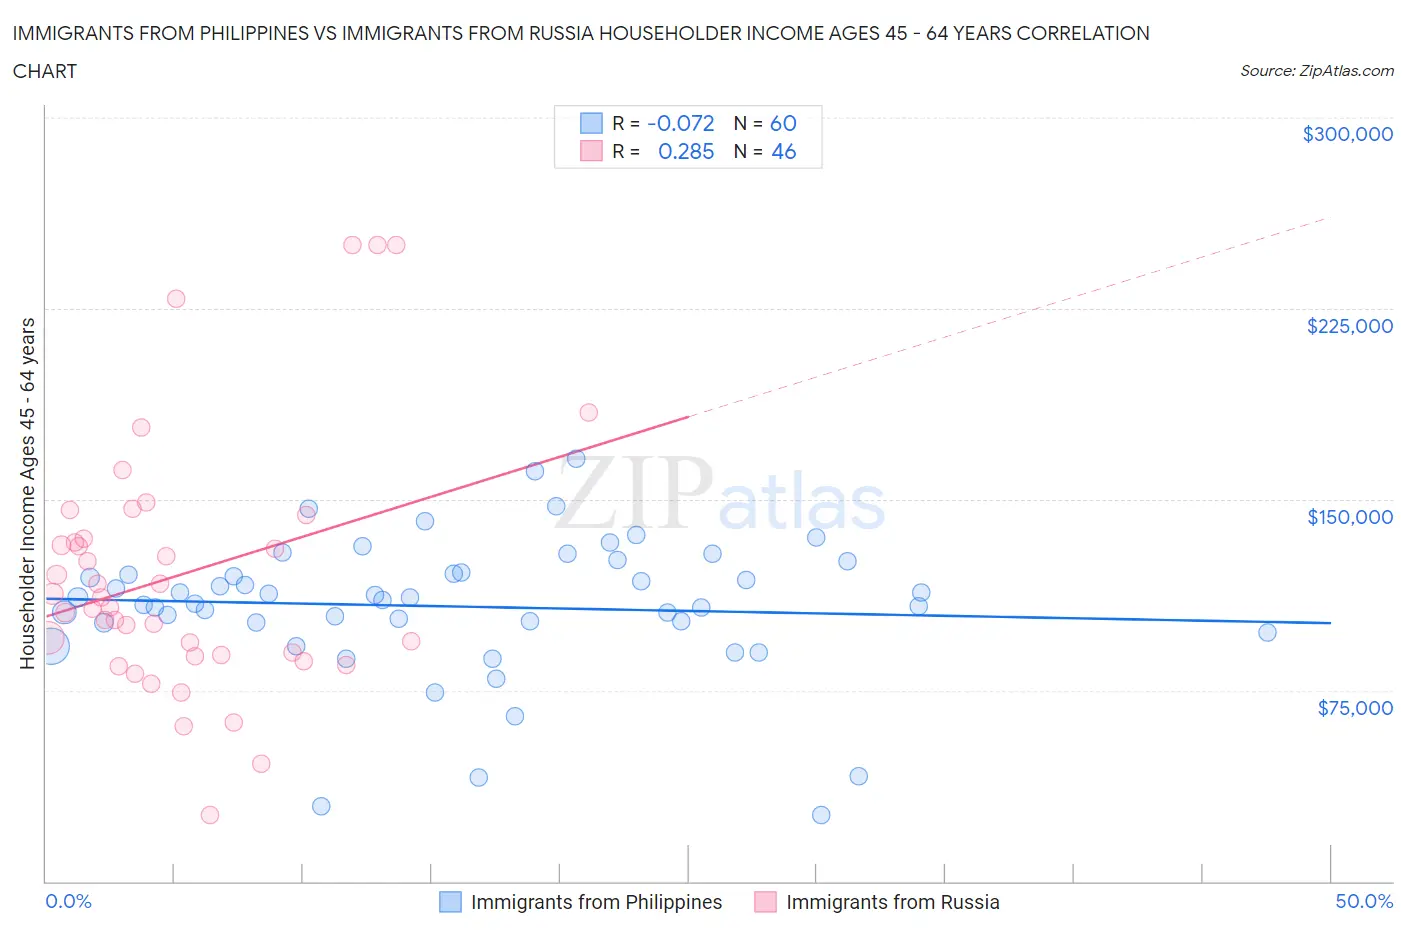 Immigrants from Philippines vs Immigrants from Russia Householder Income Ages 45 - 64 years